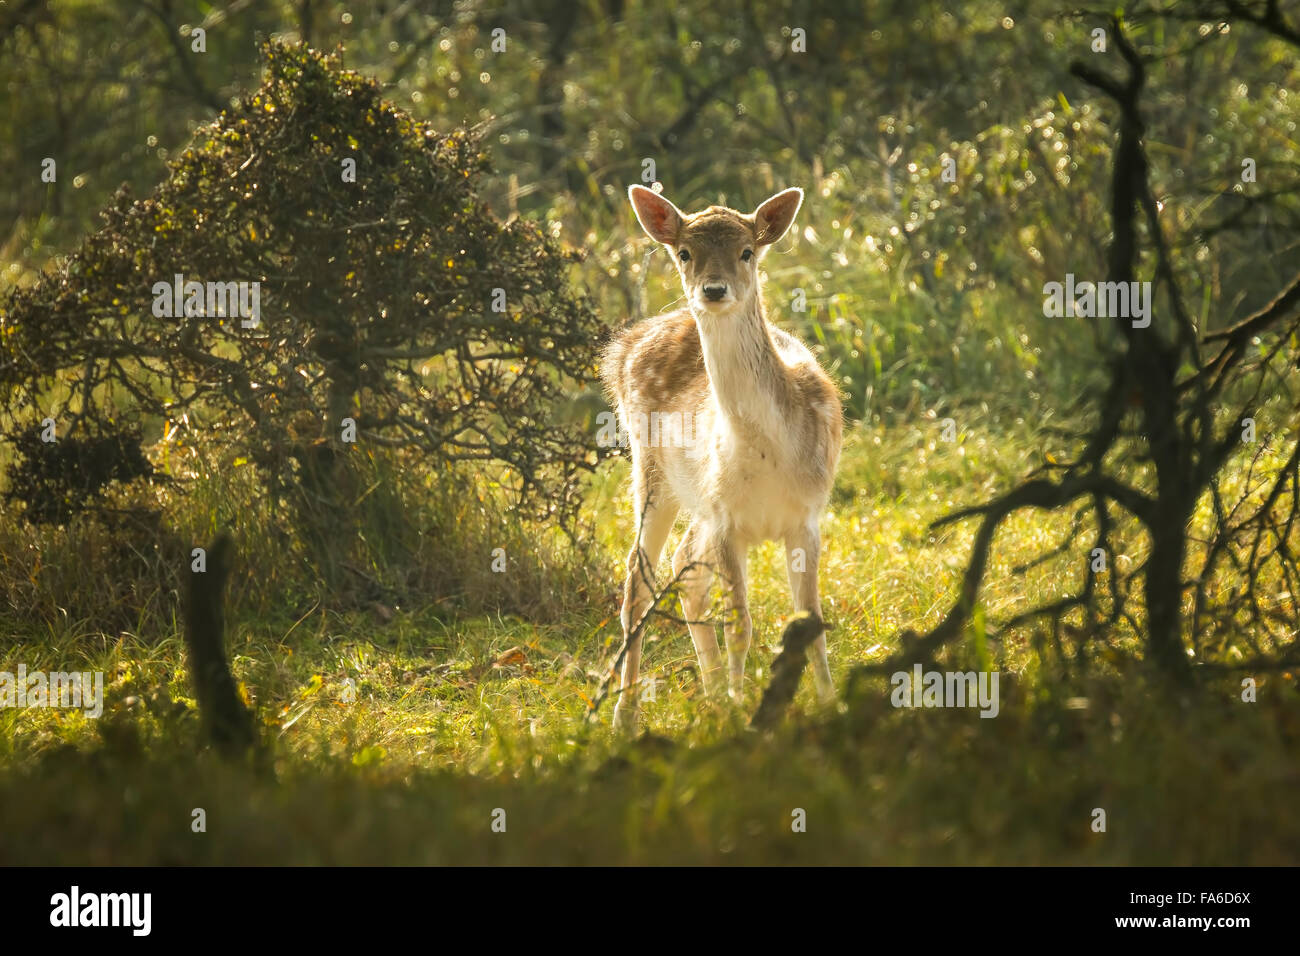 Fallow deer (Dama Dama) fawn in Autumn season. The Autumn fog and nature colors are clearly visible on the background. Stock Photo